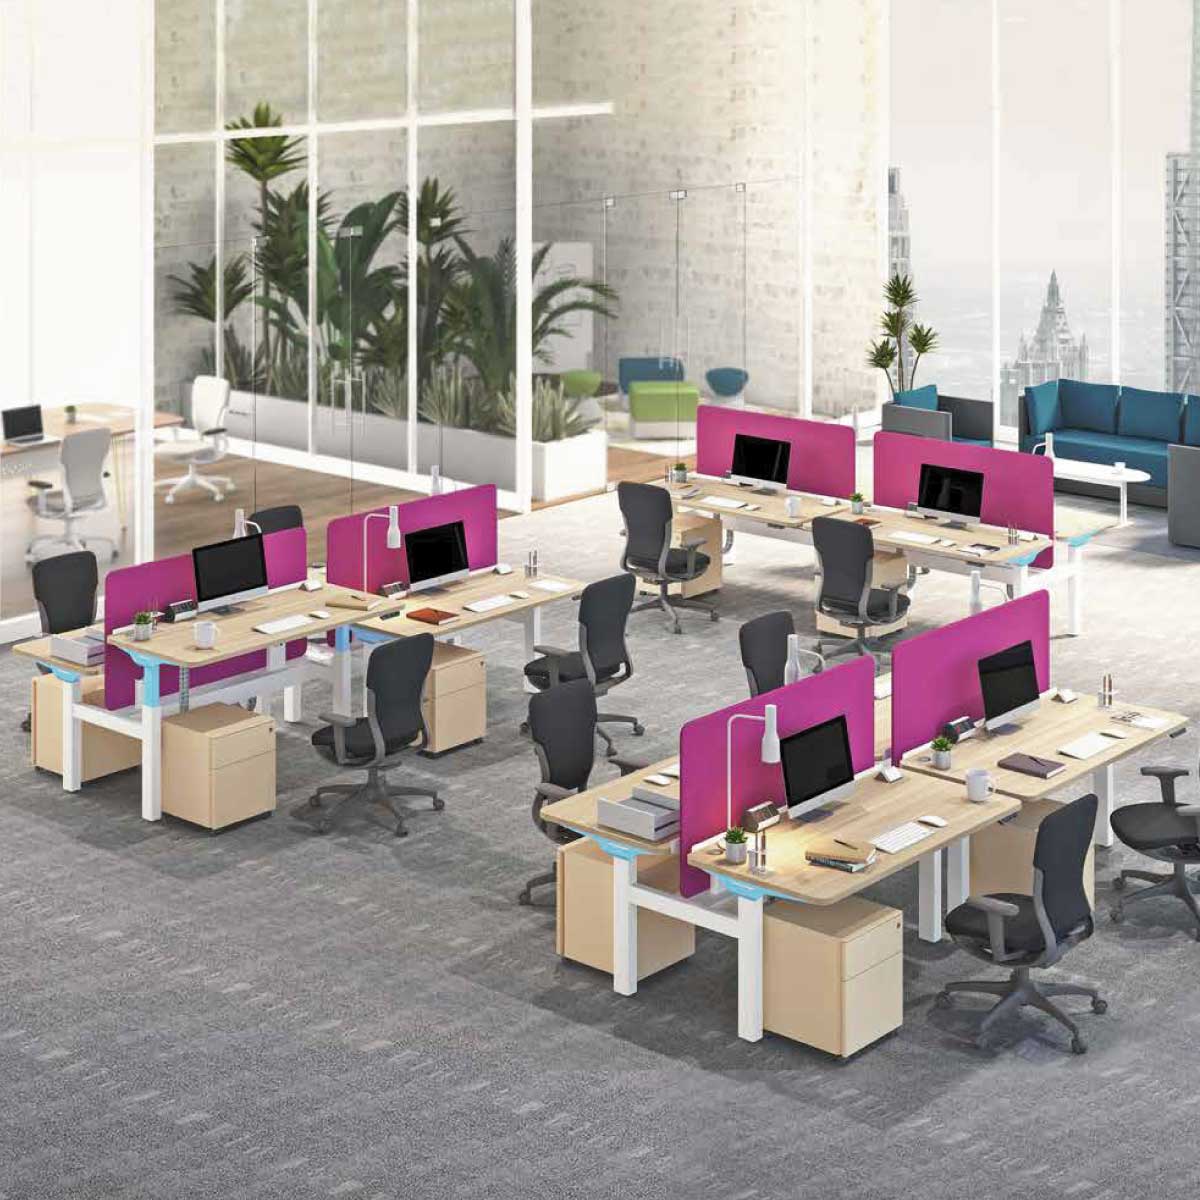 Computer Workstation Tables Manufacturers, Suppliers in Faridabad Sector 16